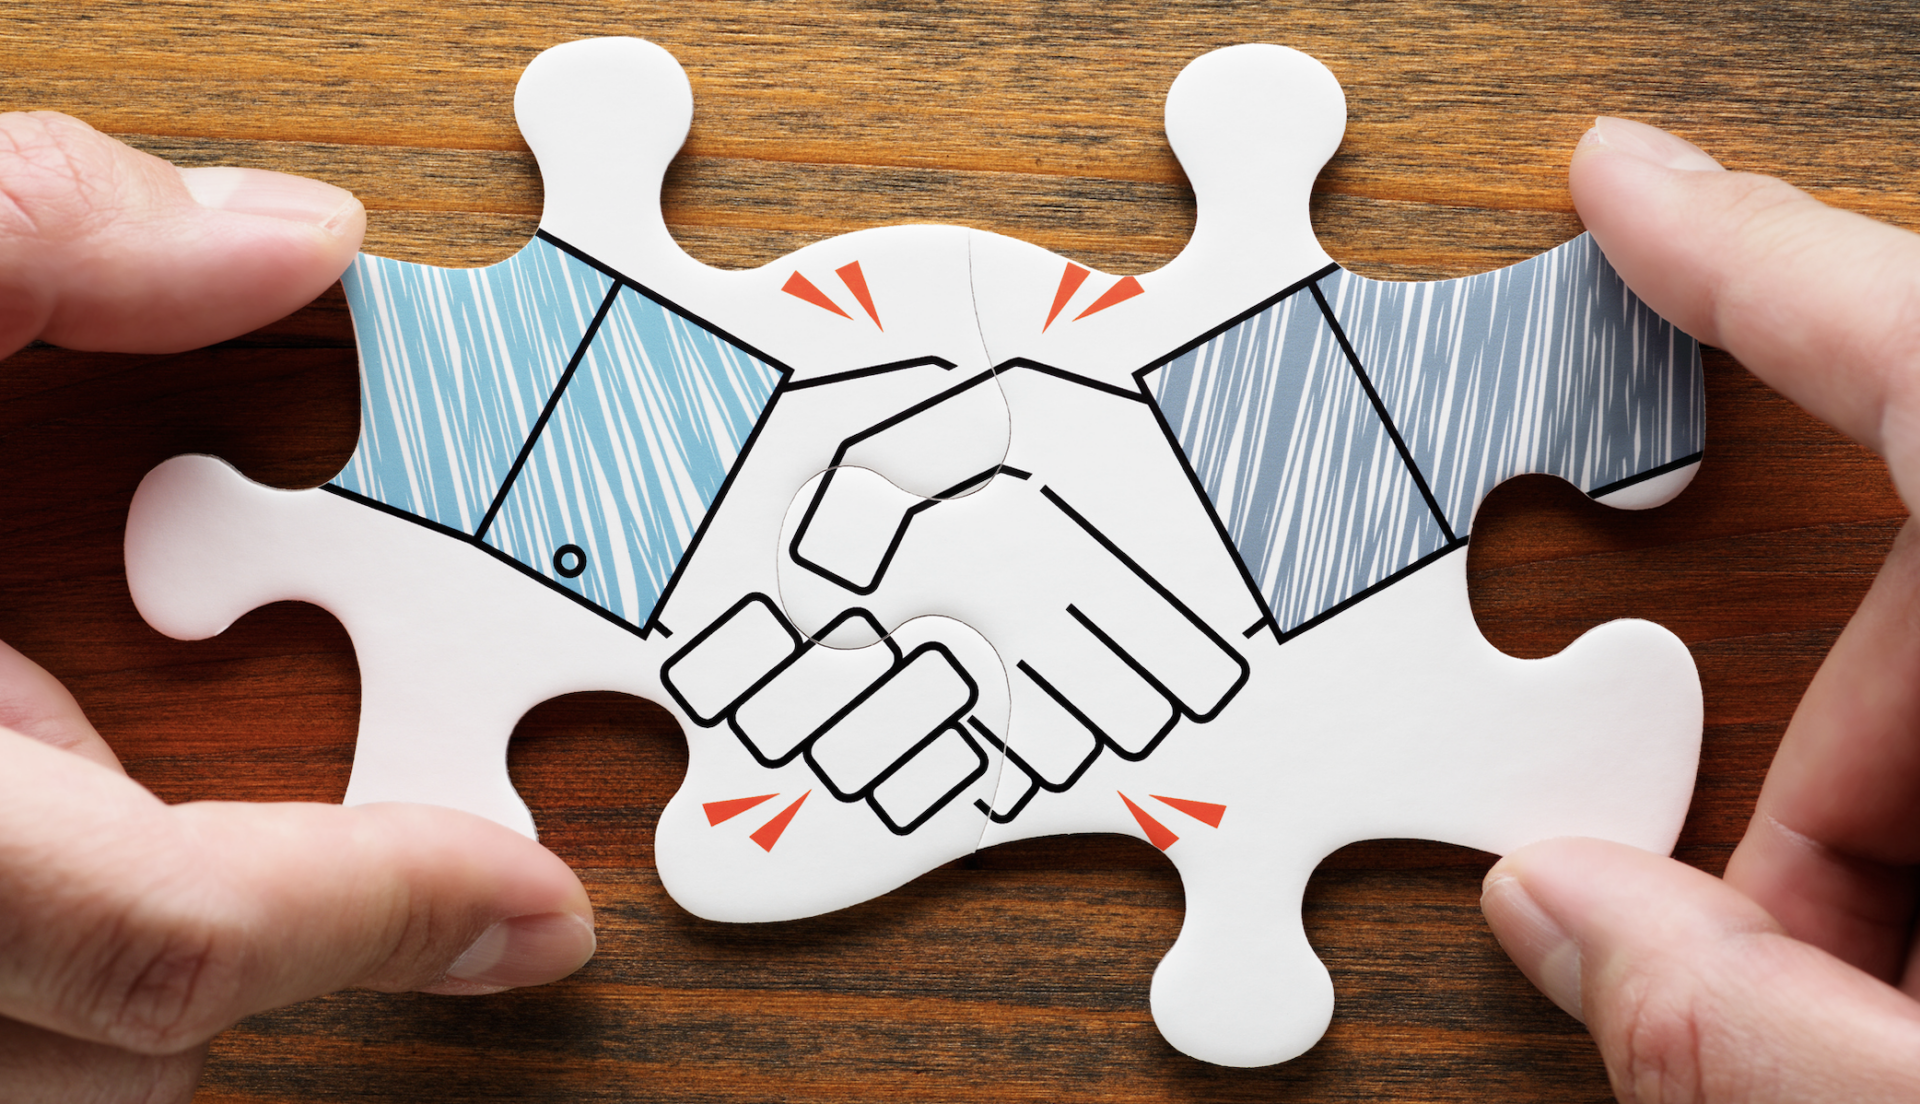 Strengthening Payer and Provider Relationships Through Collaboration